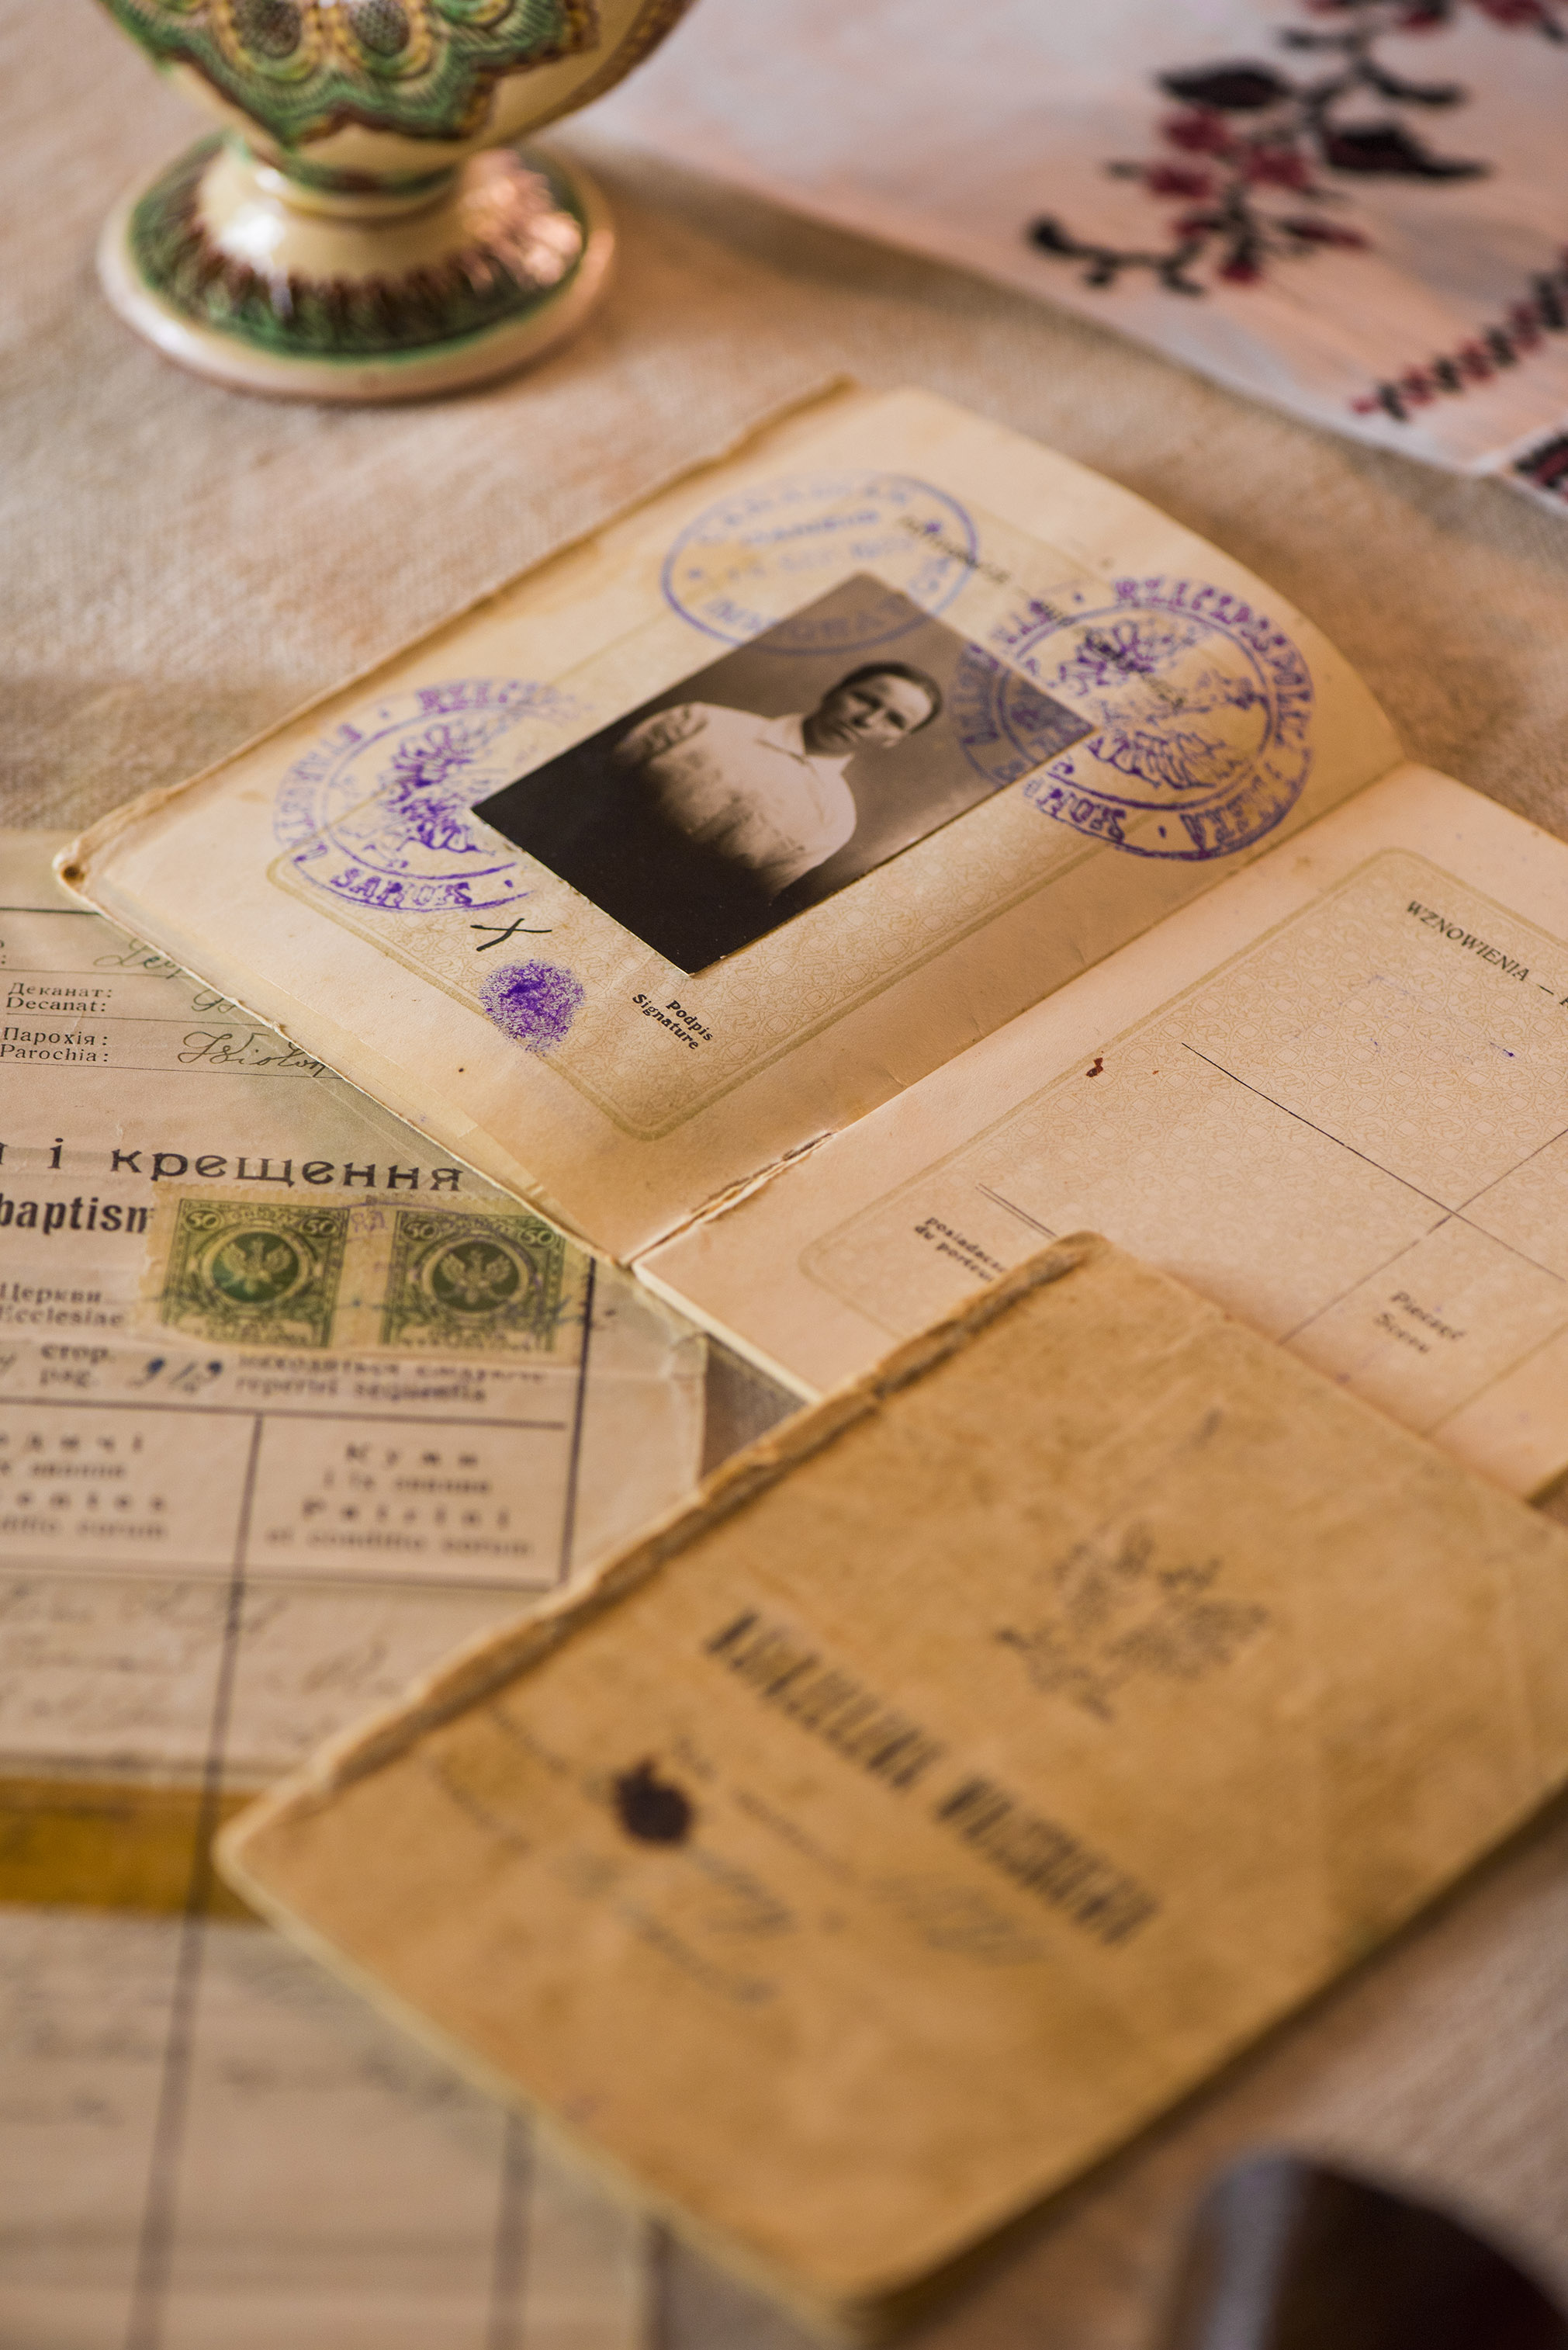 A small old passport-like book open to a page with a black and white photo of a woman surrounded by purple inked, circular stamps.